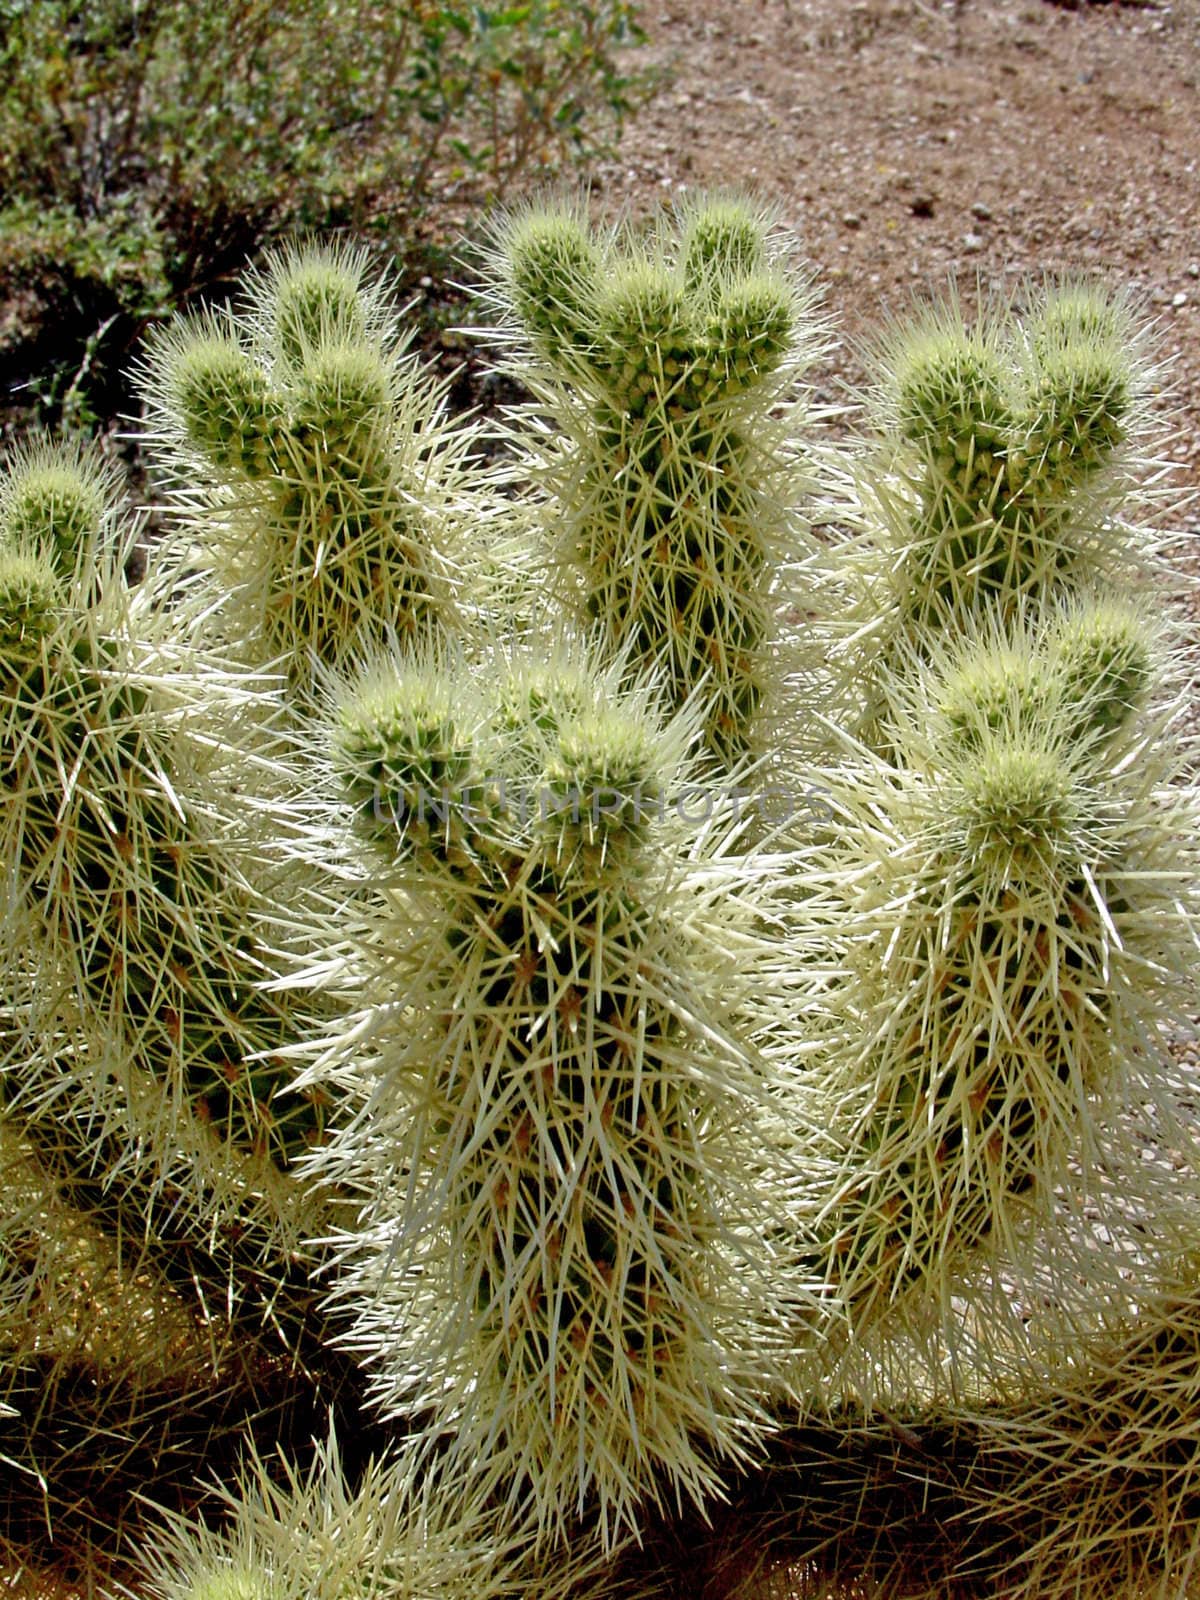 This is a picture of a Teddy Bear Cactus, taken in the Arizona desert, the shape is the reason that it is called that, because of its resemblance of a teddy bear. But a word of caution, the needles on this are very sharp! You certainly do not want to cuddle with it.